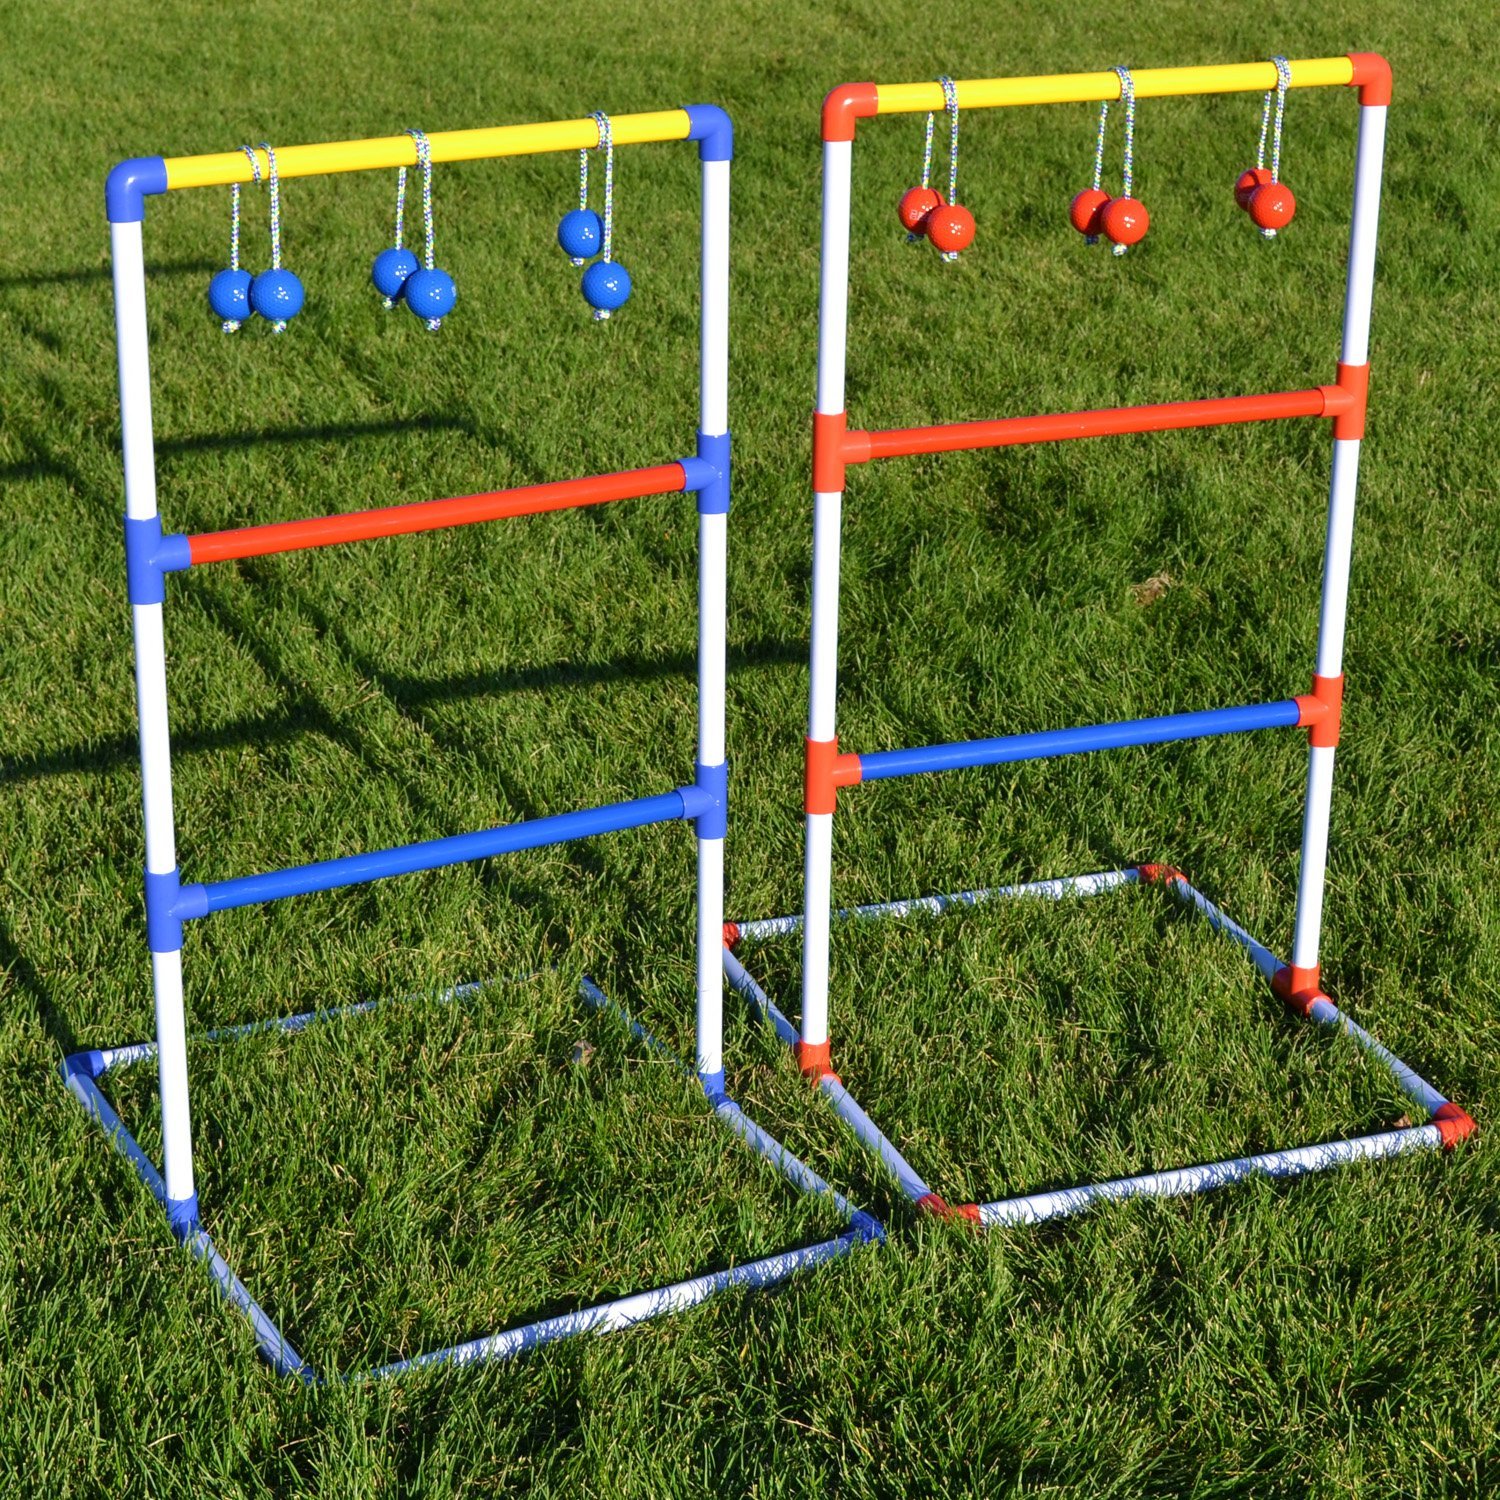 Ladderball: Great Camping Or Tailgate Party Game